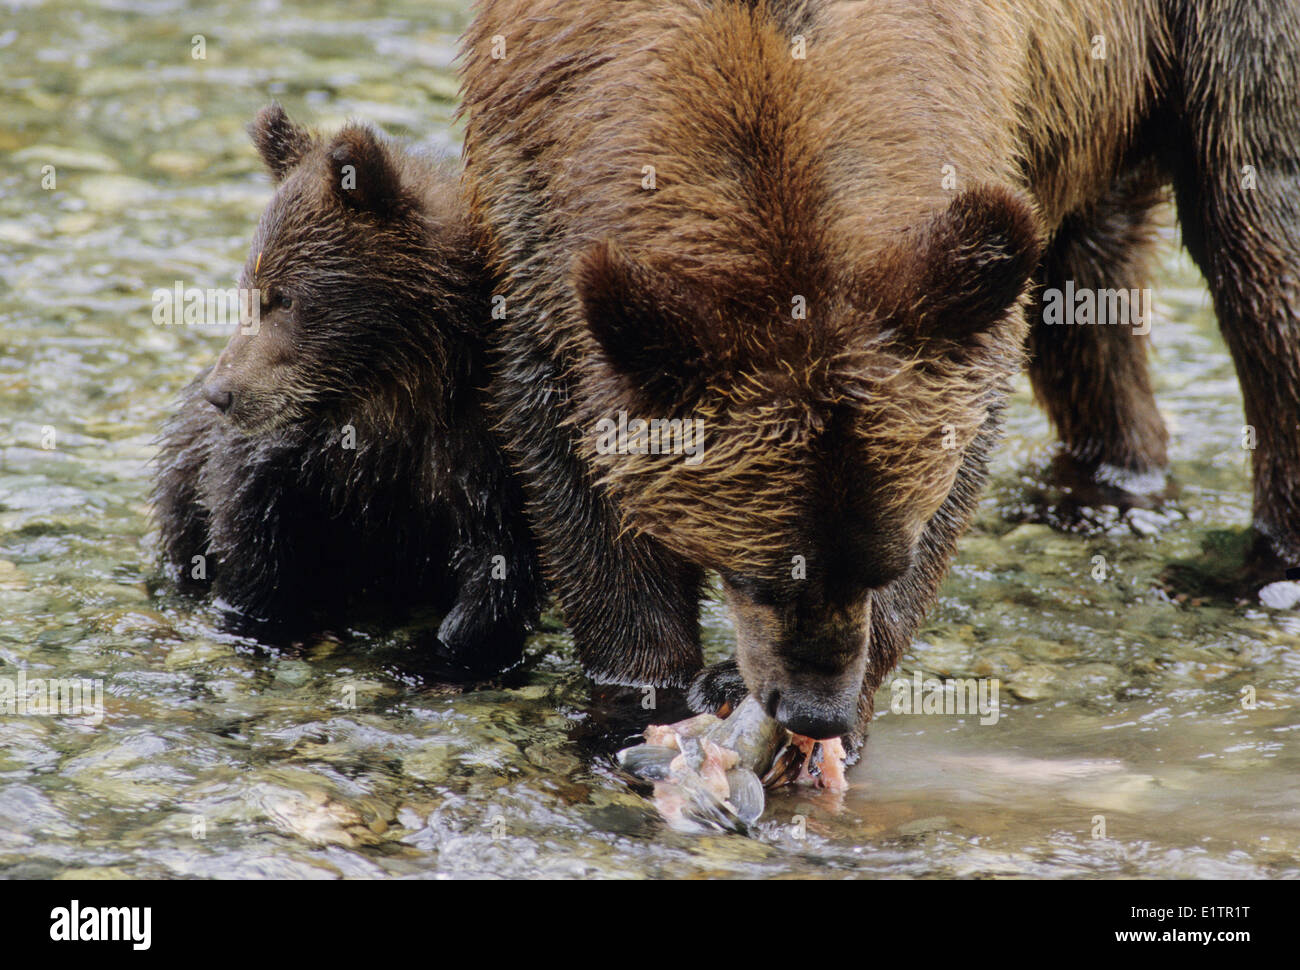 Grizzly Bear (Ursus arctos horribilis) Adult Female & Young who will remain with her for up to three years. Summer Alaska Stock Photo